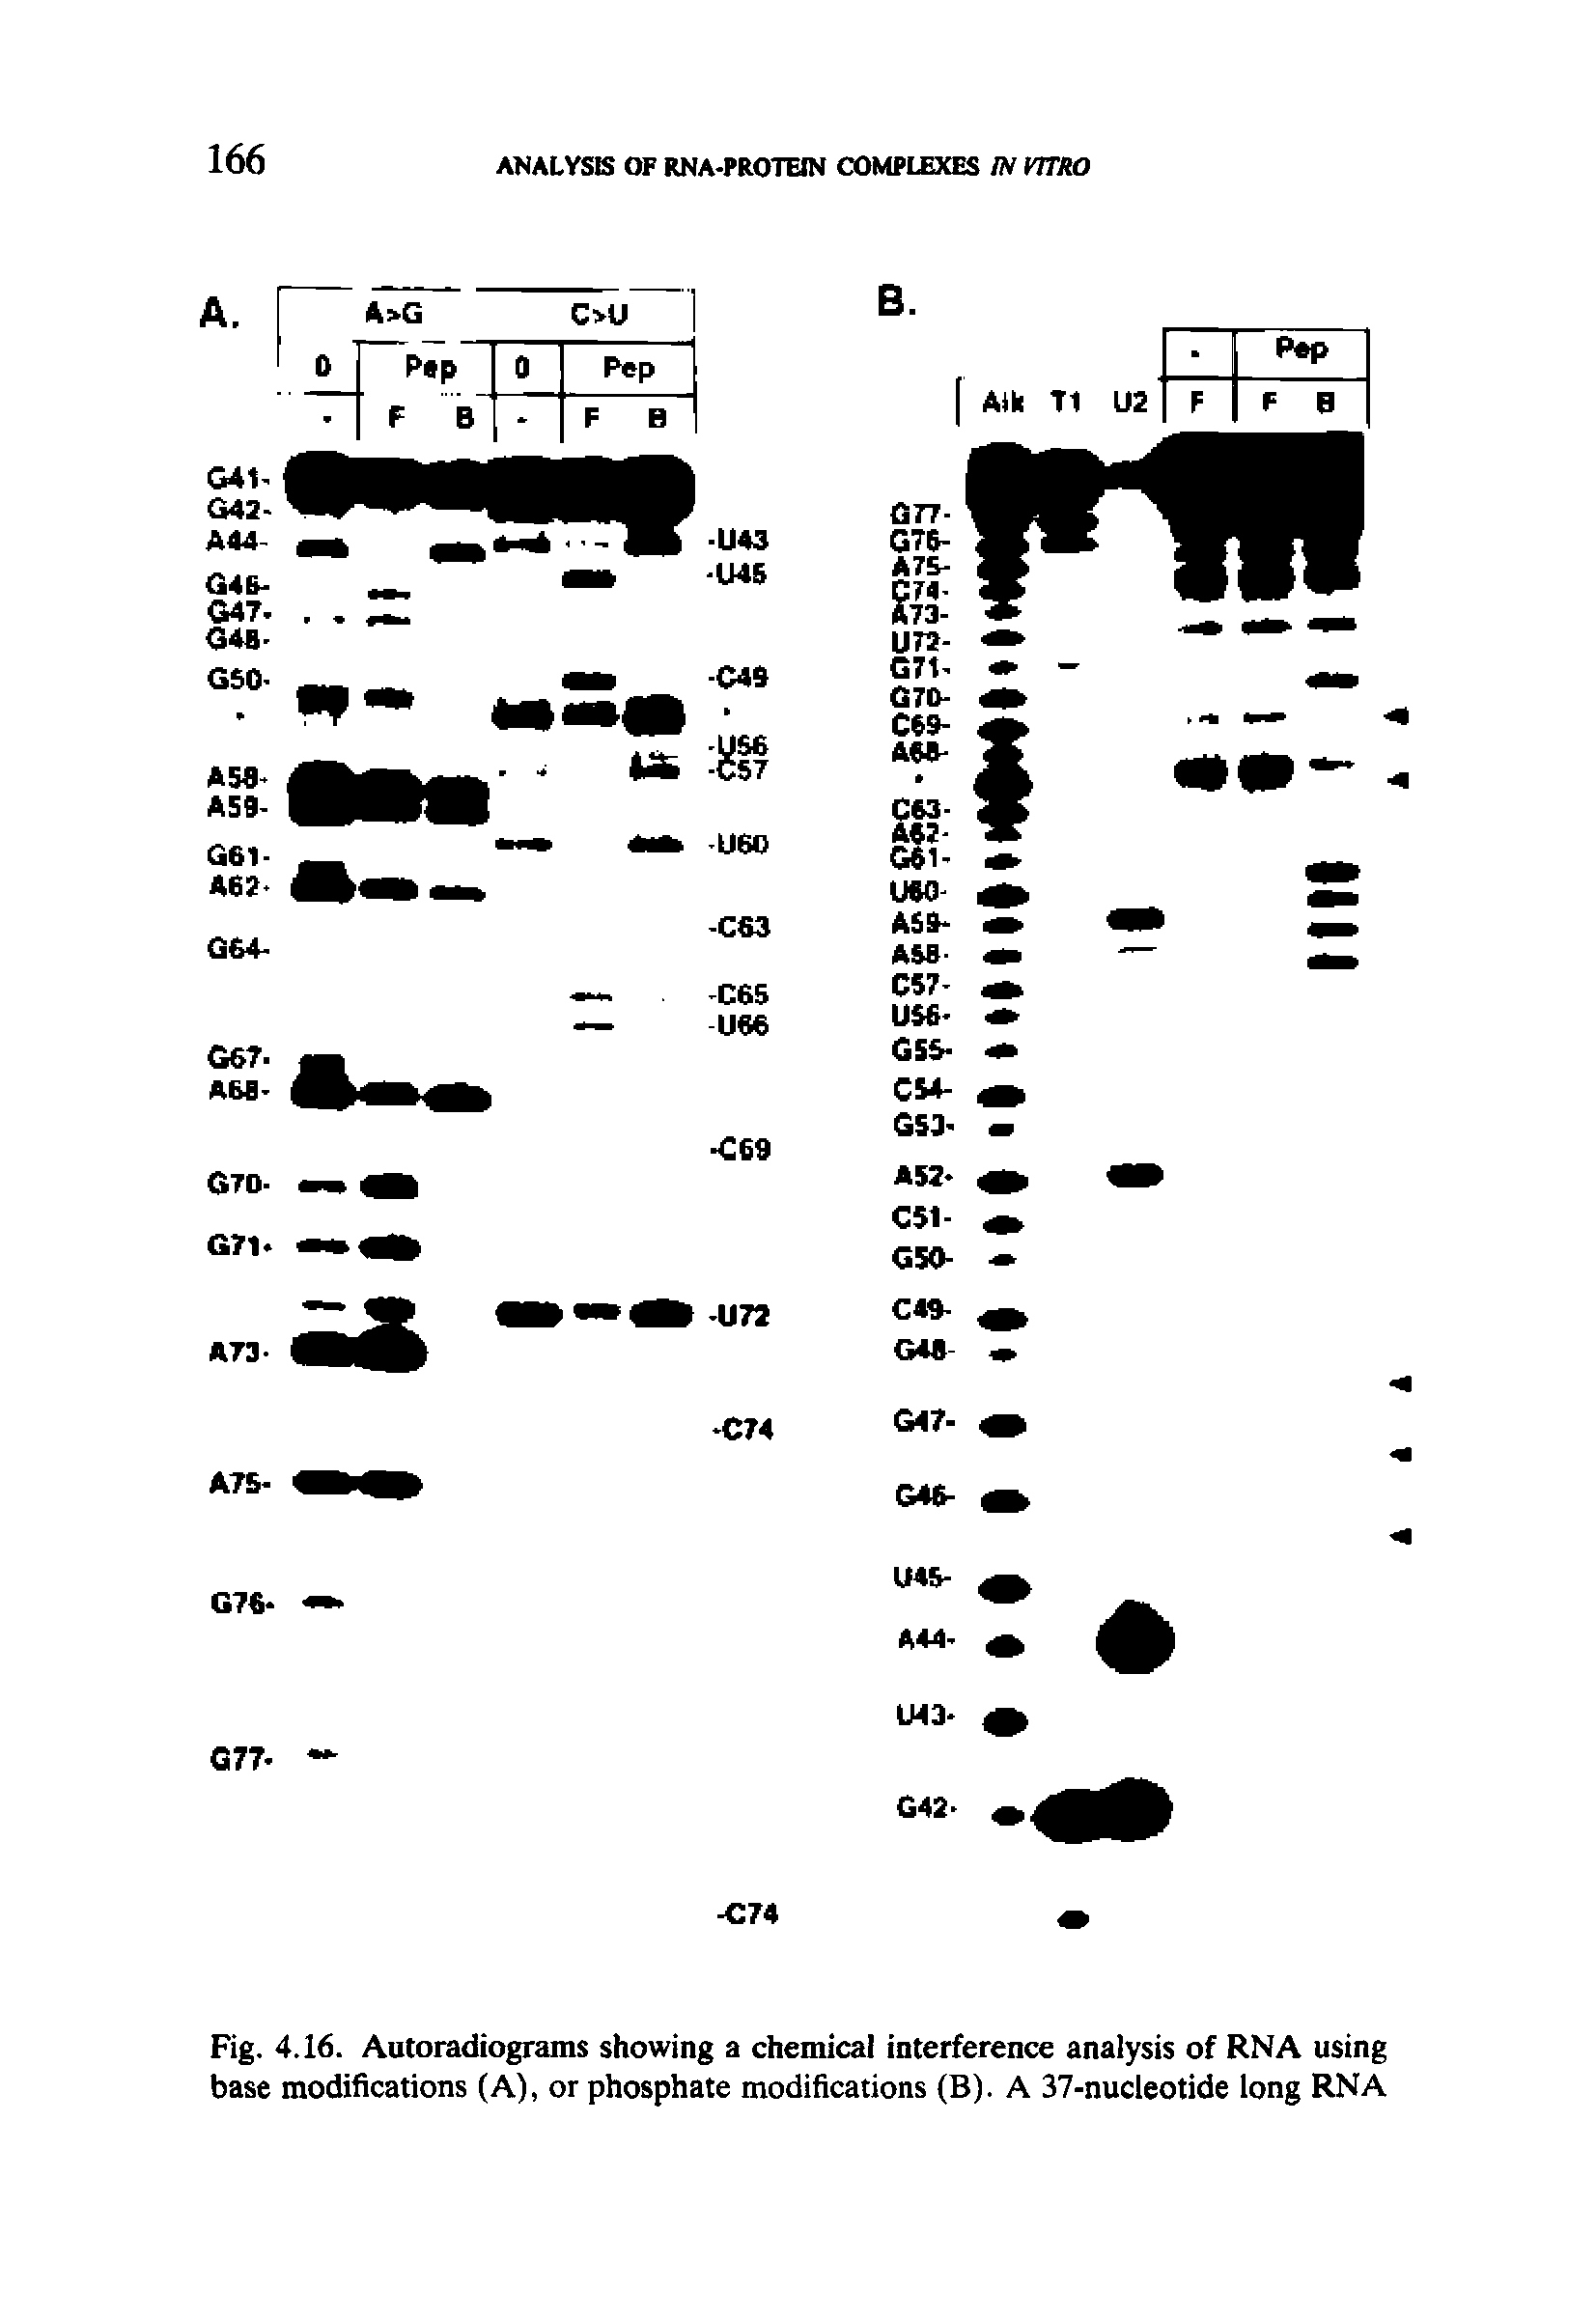 Fig. 4.16. Autoradiograms showing a chemical interference analysis of RNA using base modifications (A), or phosphate modifications (B). A 37-nucleotide long RNA...